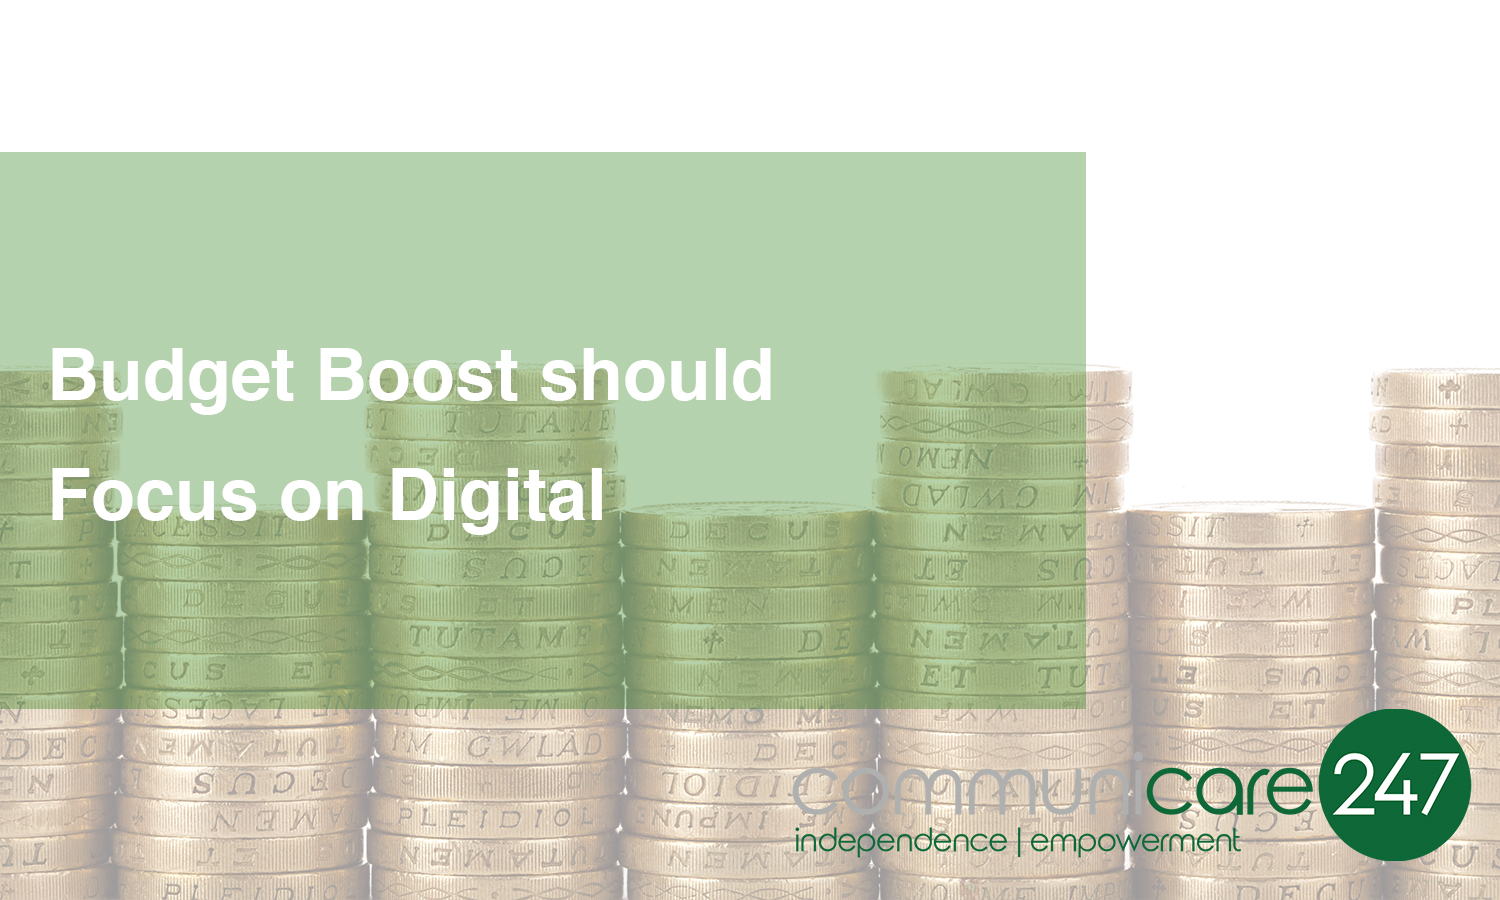 Communicare247 calls for focus on digital so £695million budget boost makes a difference